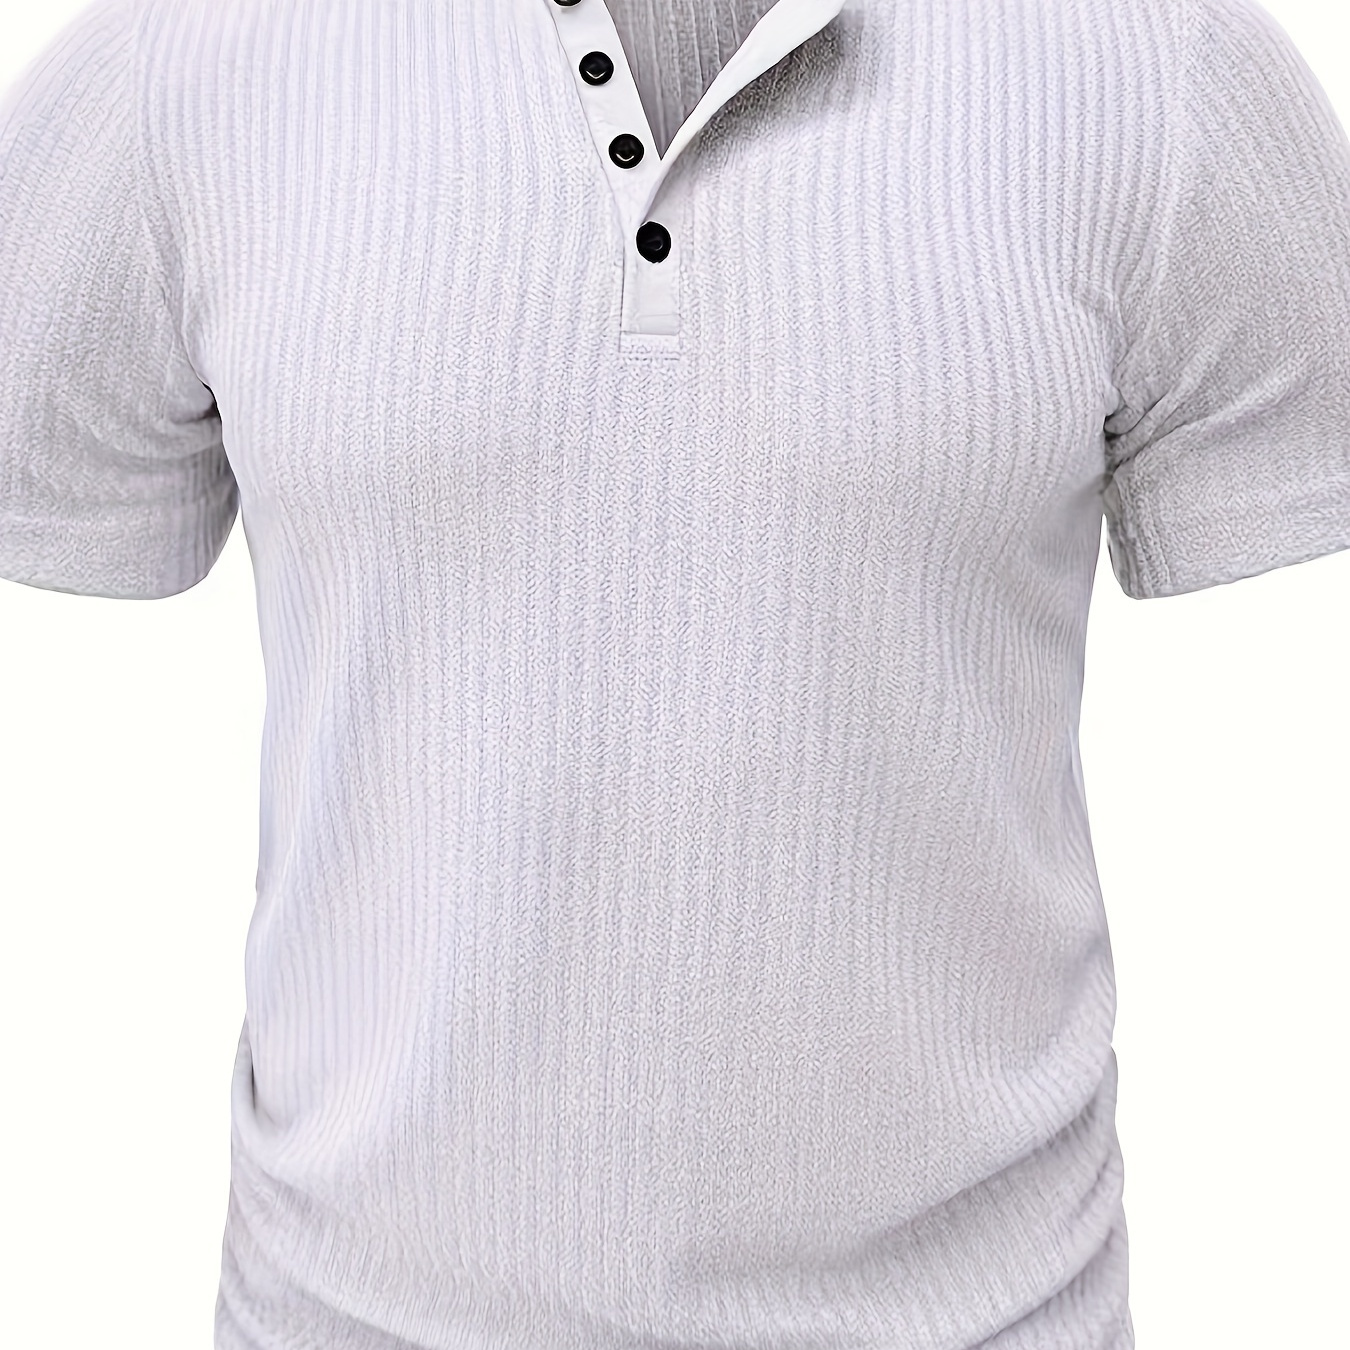 

Solid Stripe Pattern Knit Short Sleeve T-shirt With Henley Neck, Chic And Stylish Sports Tops For Men's Summer Leisurewear And Outdoors Activities